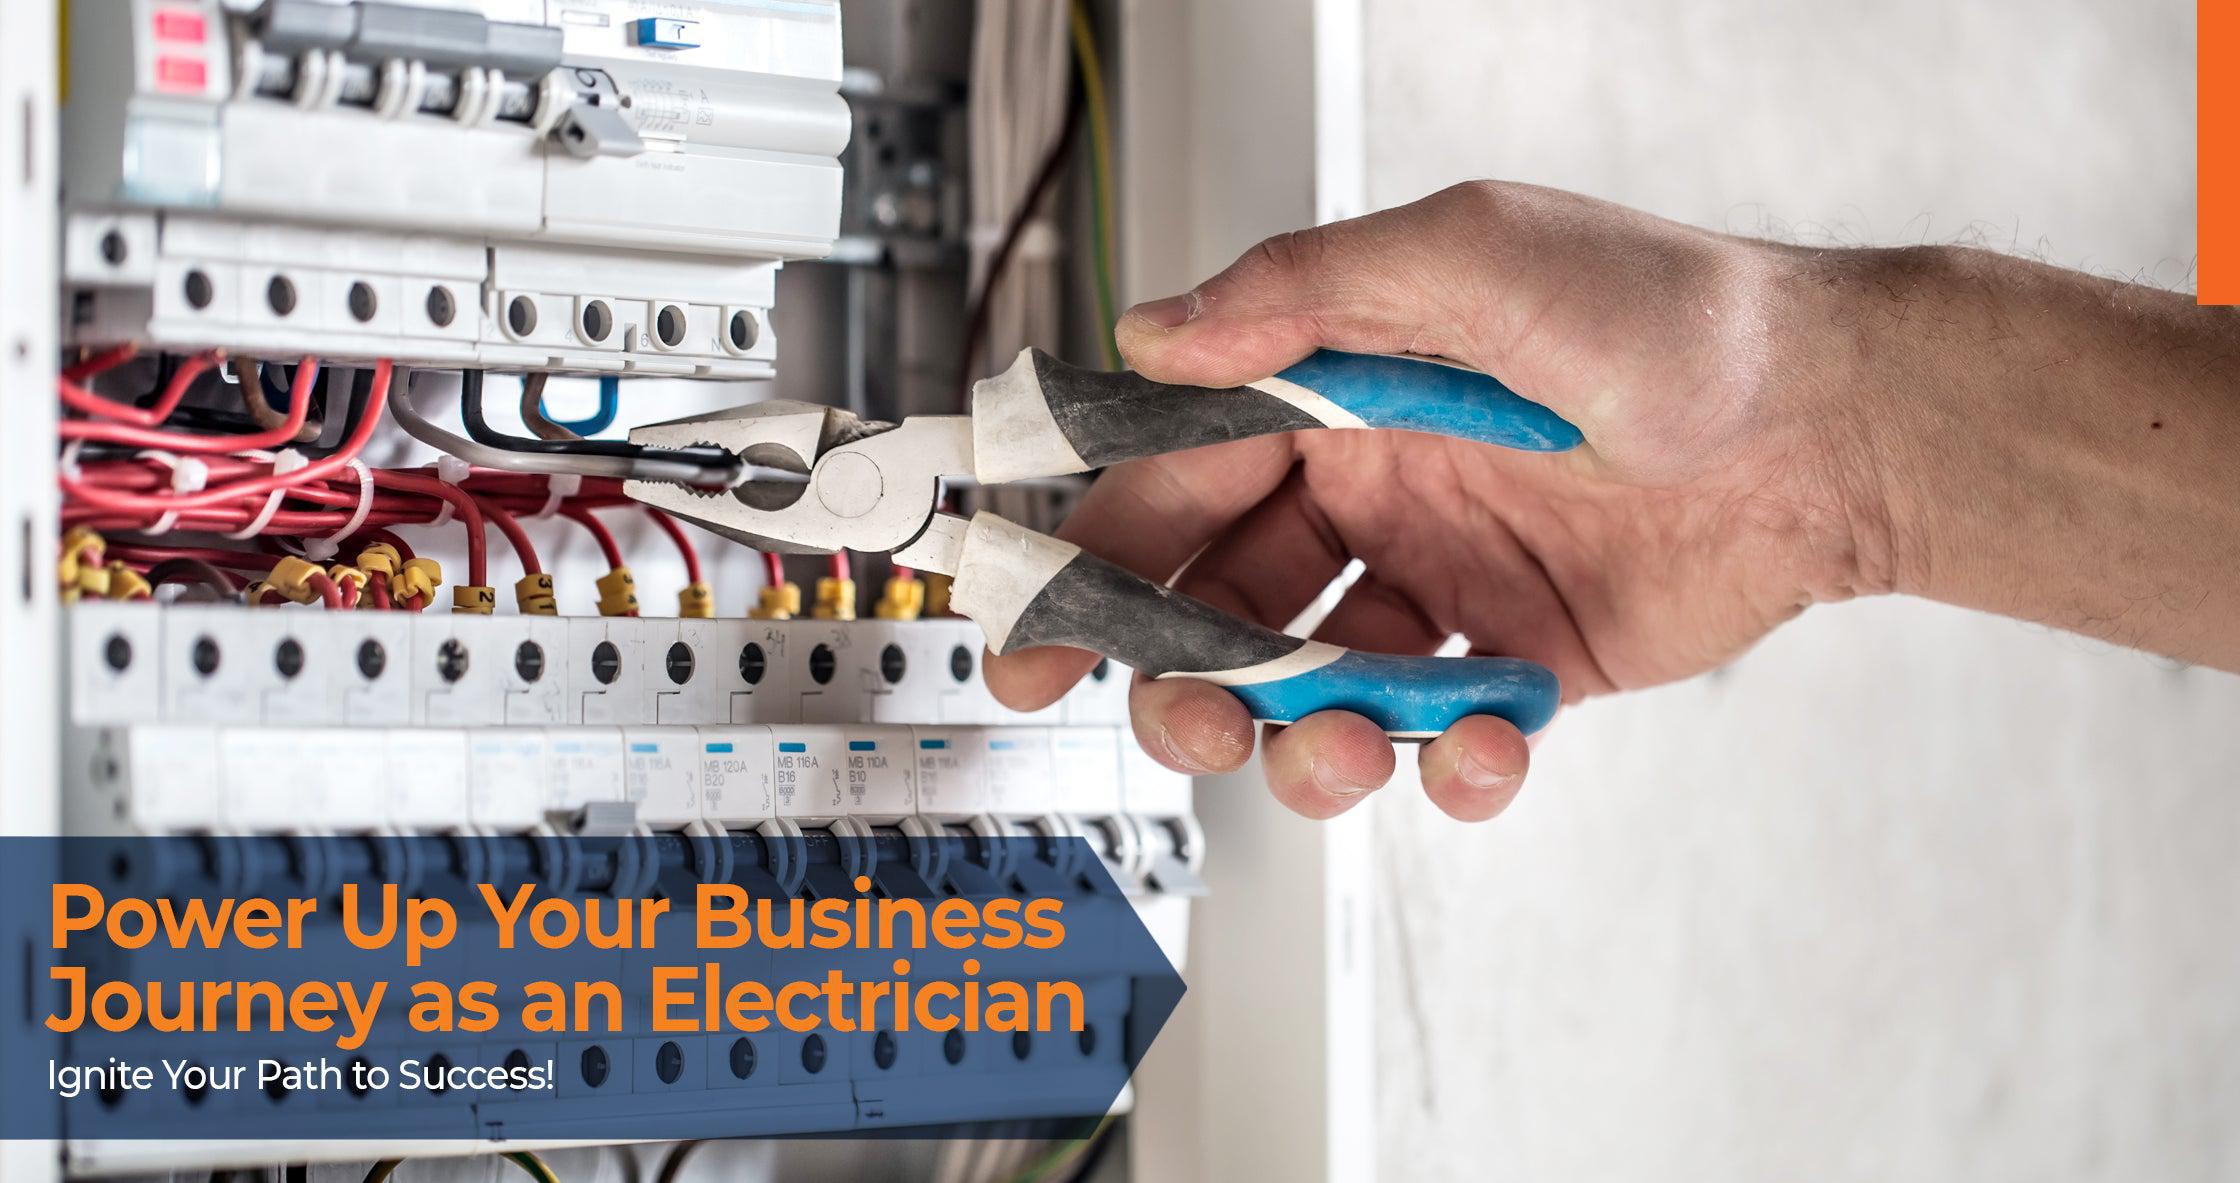 Power up your business journey as an electrician. Ignite your path to success